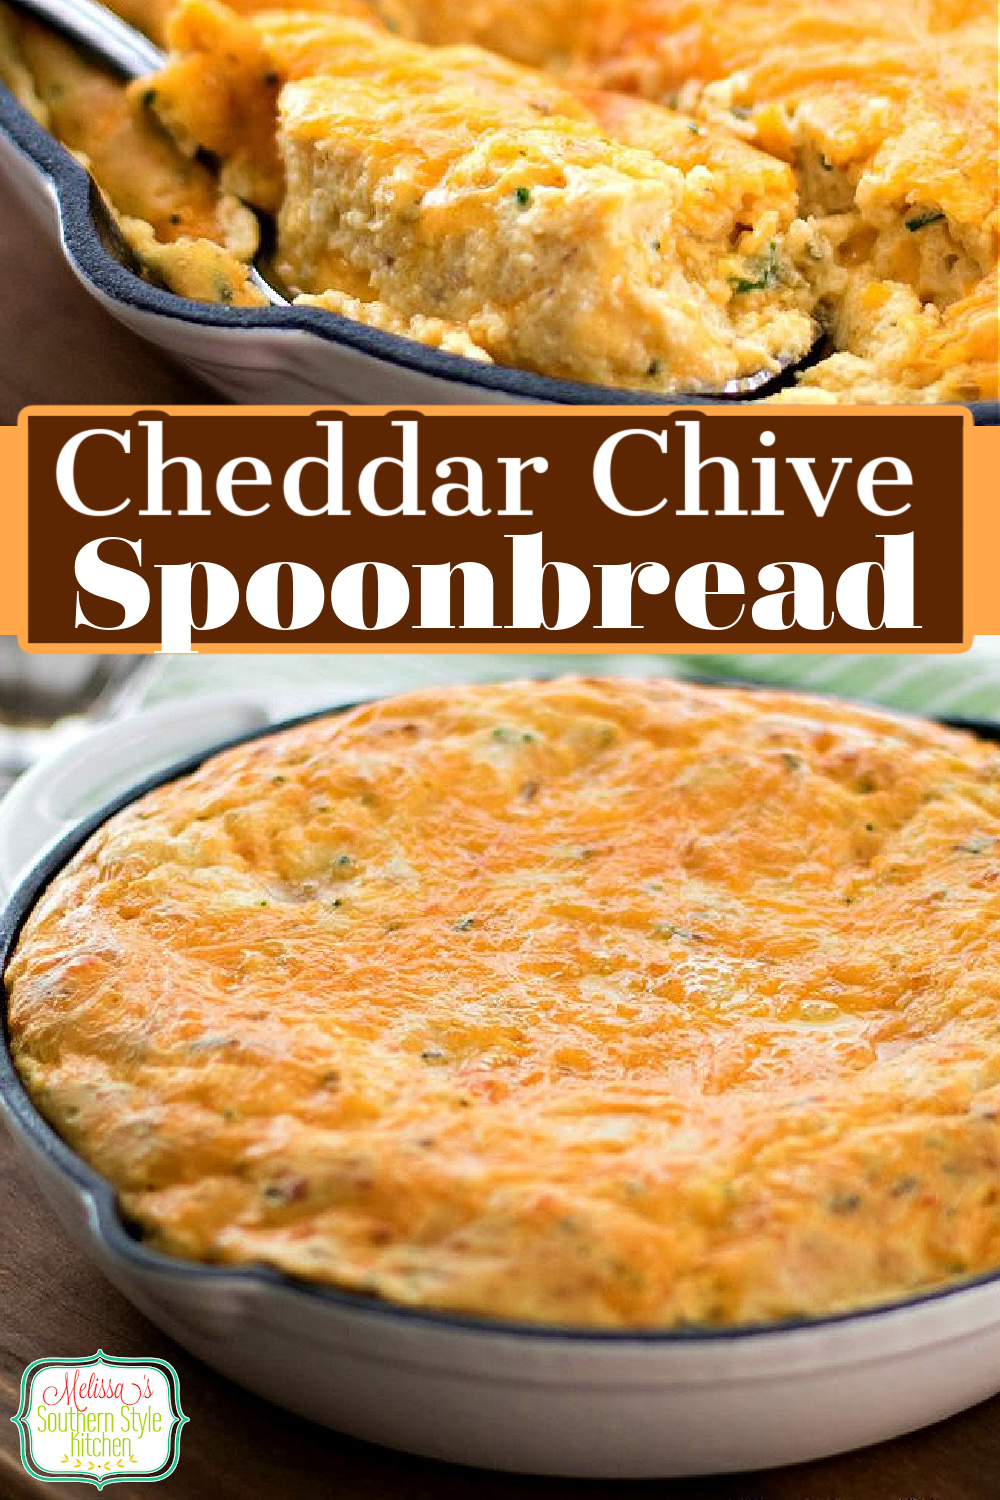 Serve this creamy Cheddar Chive Spoon Bread as a side dish with any meal #spoonbread #cheddarcheese #southernspoonbread #breadrecipes #dinnerideas #sidedishes #southernfood #southernrecipes via @melissasssk